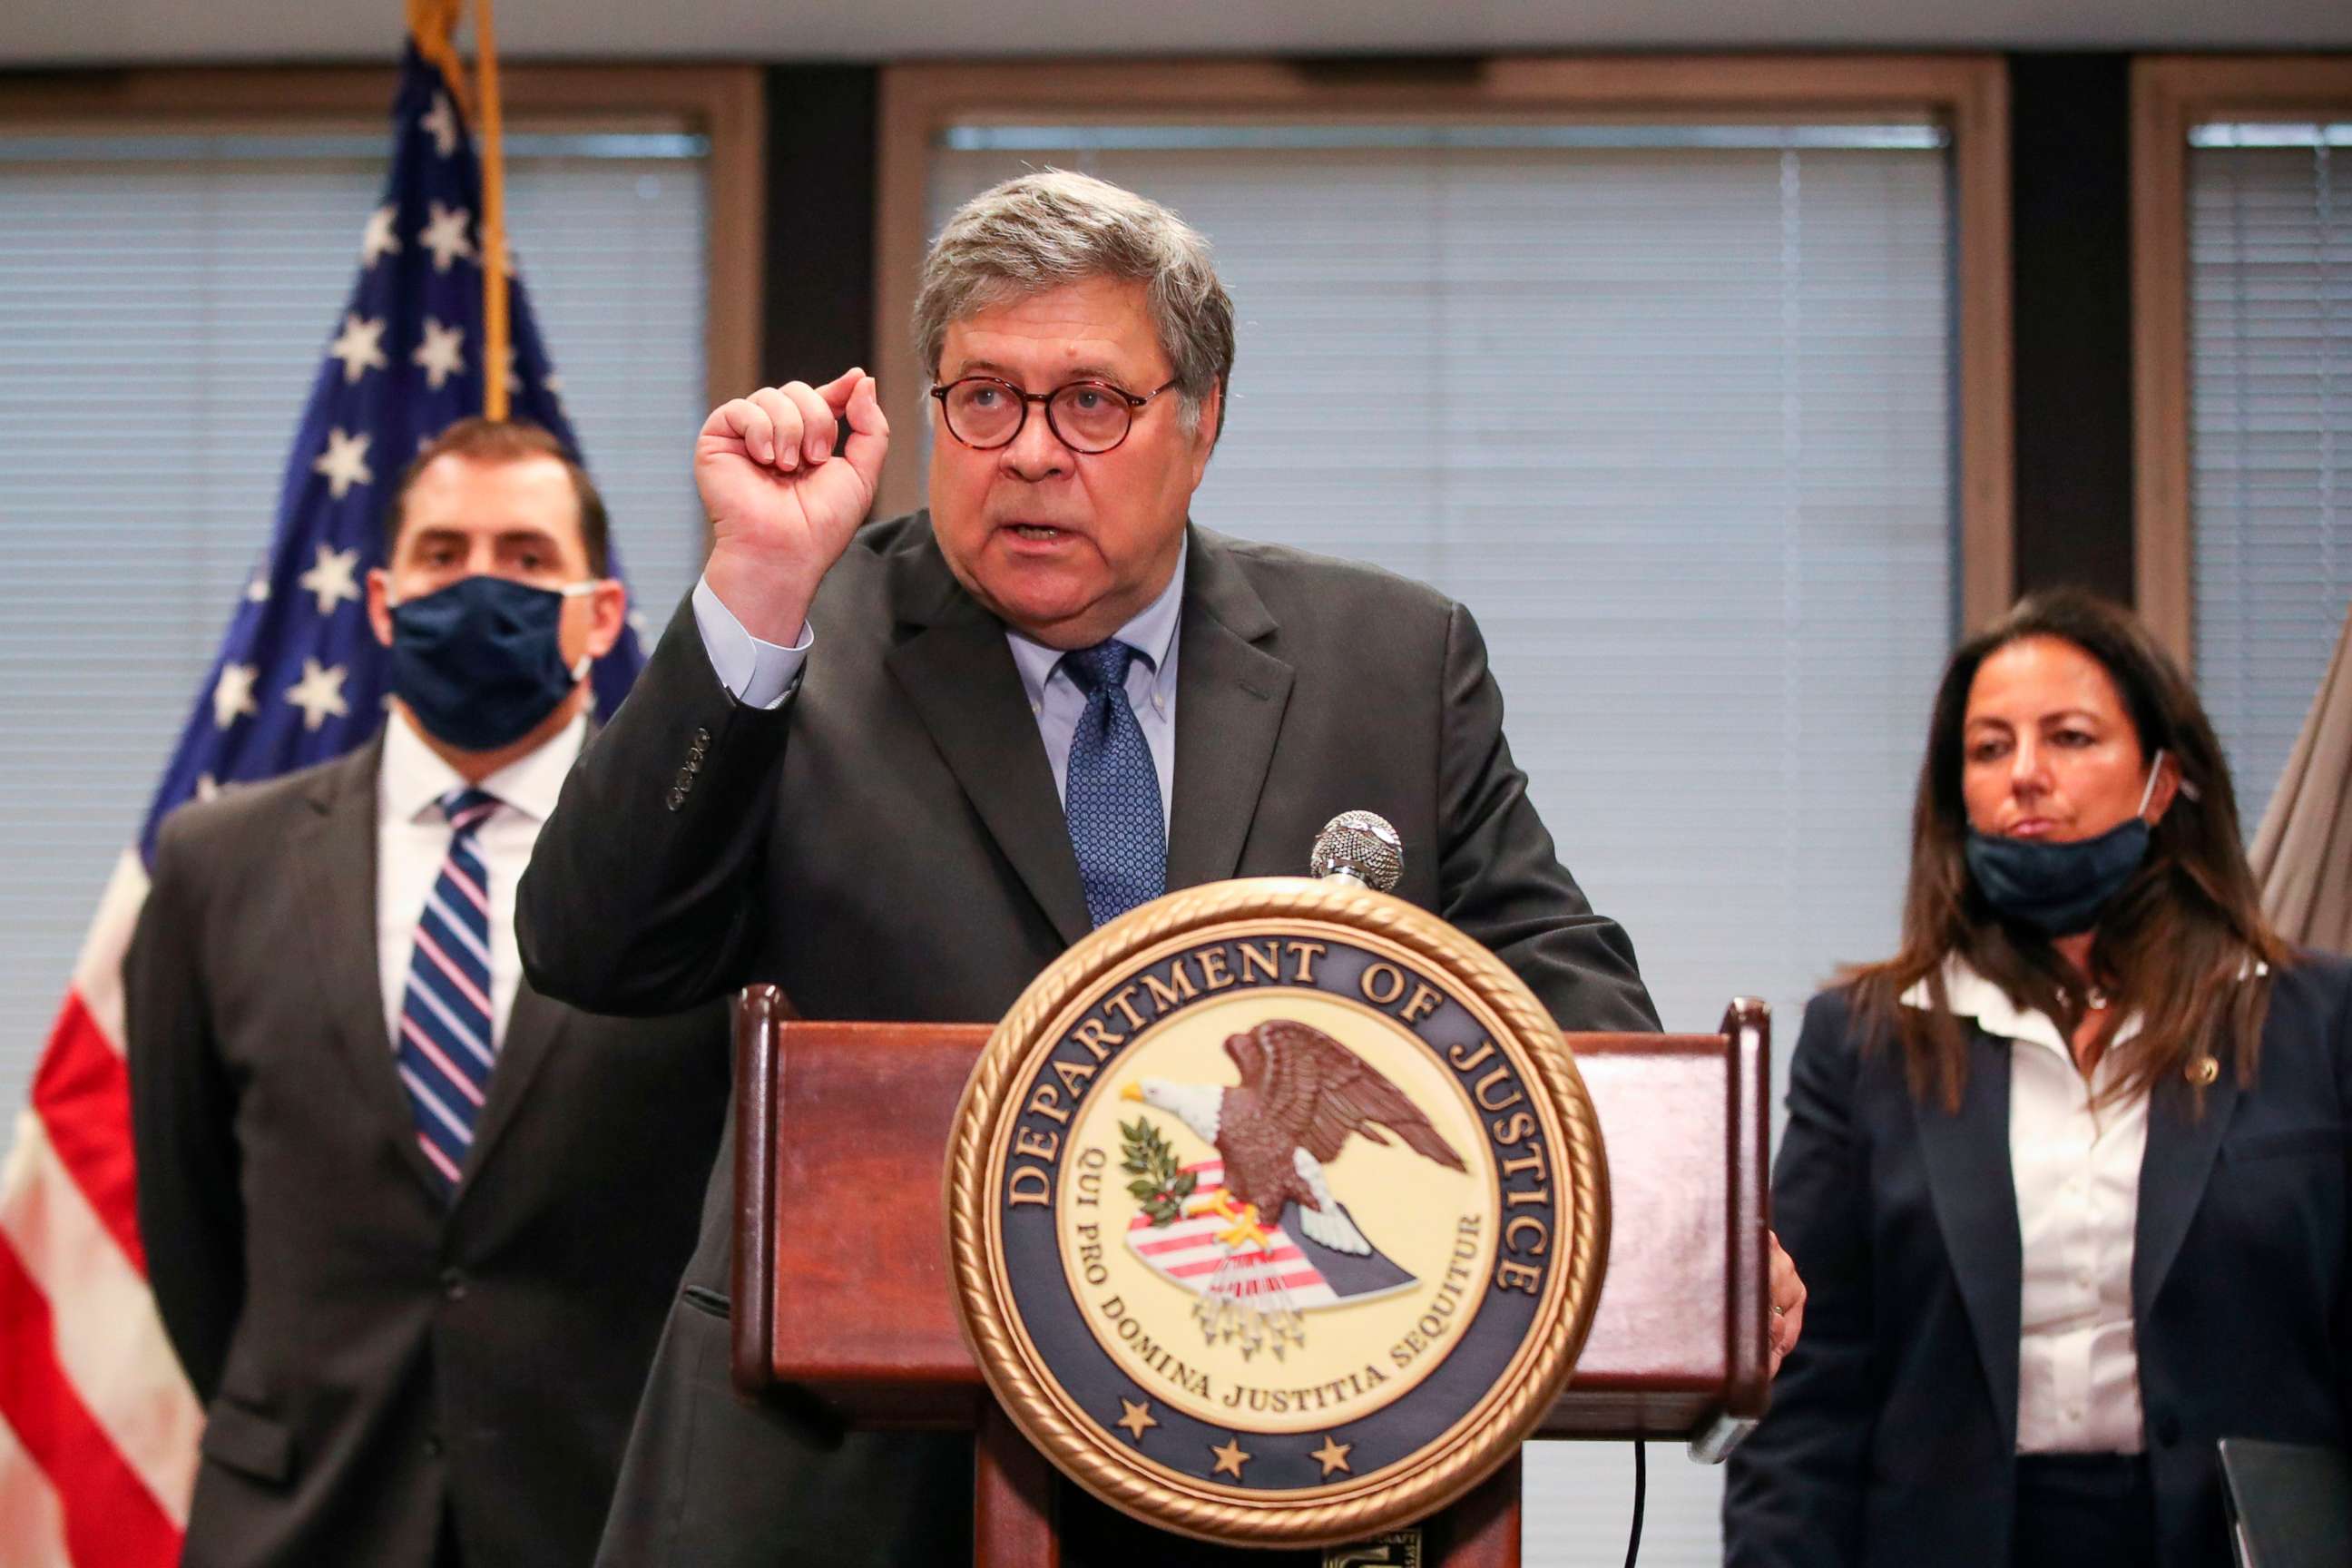 PHOTO: U.S. Attorney General William Barr speaks on Operation Legend, the federal law enforcement operation, during a press conference in Chicago on Sept. 9, 2020.